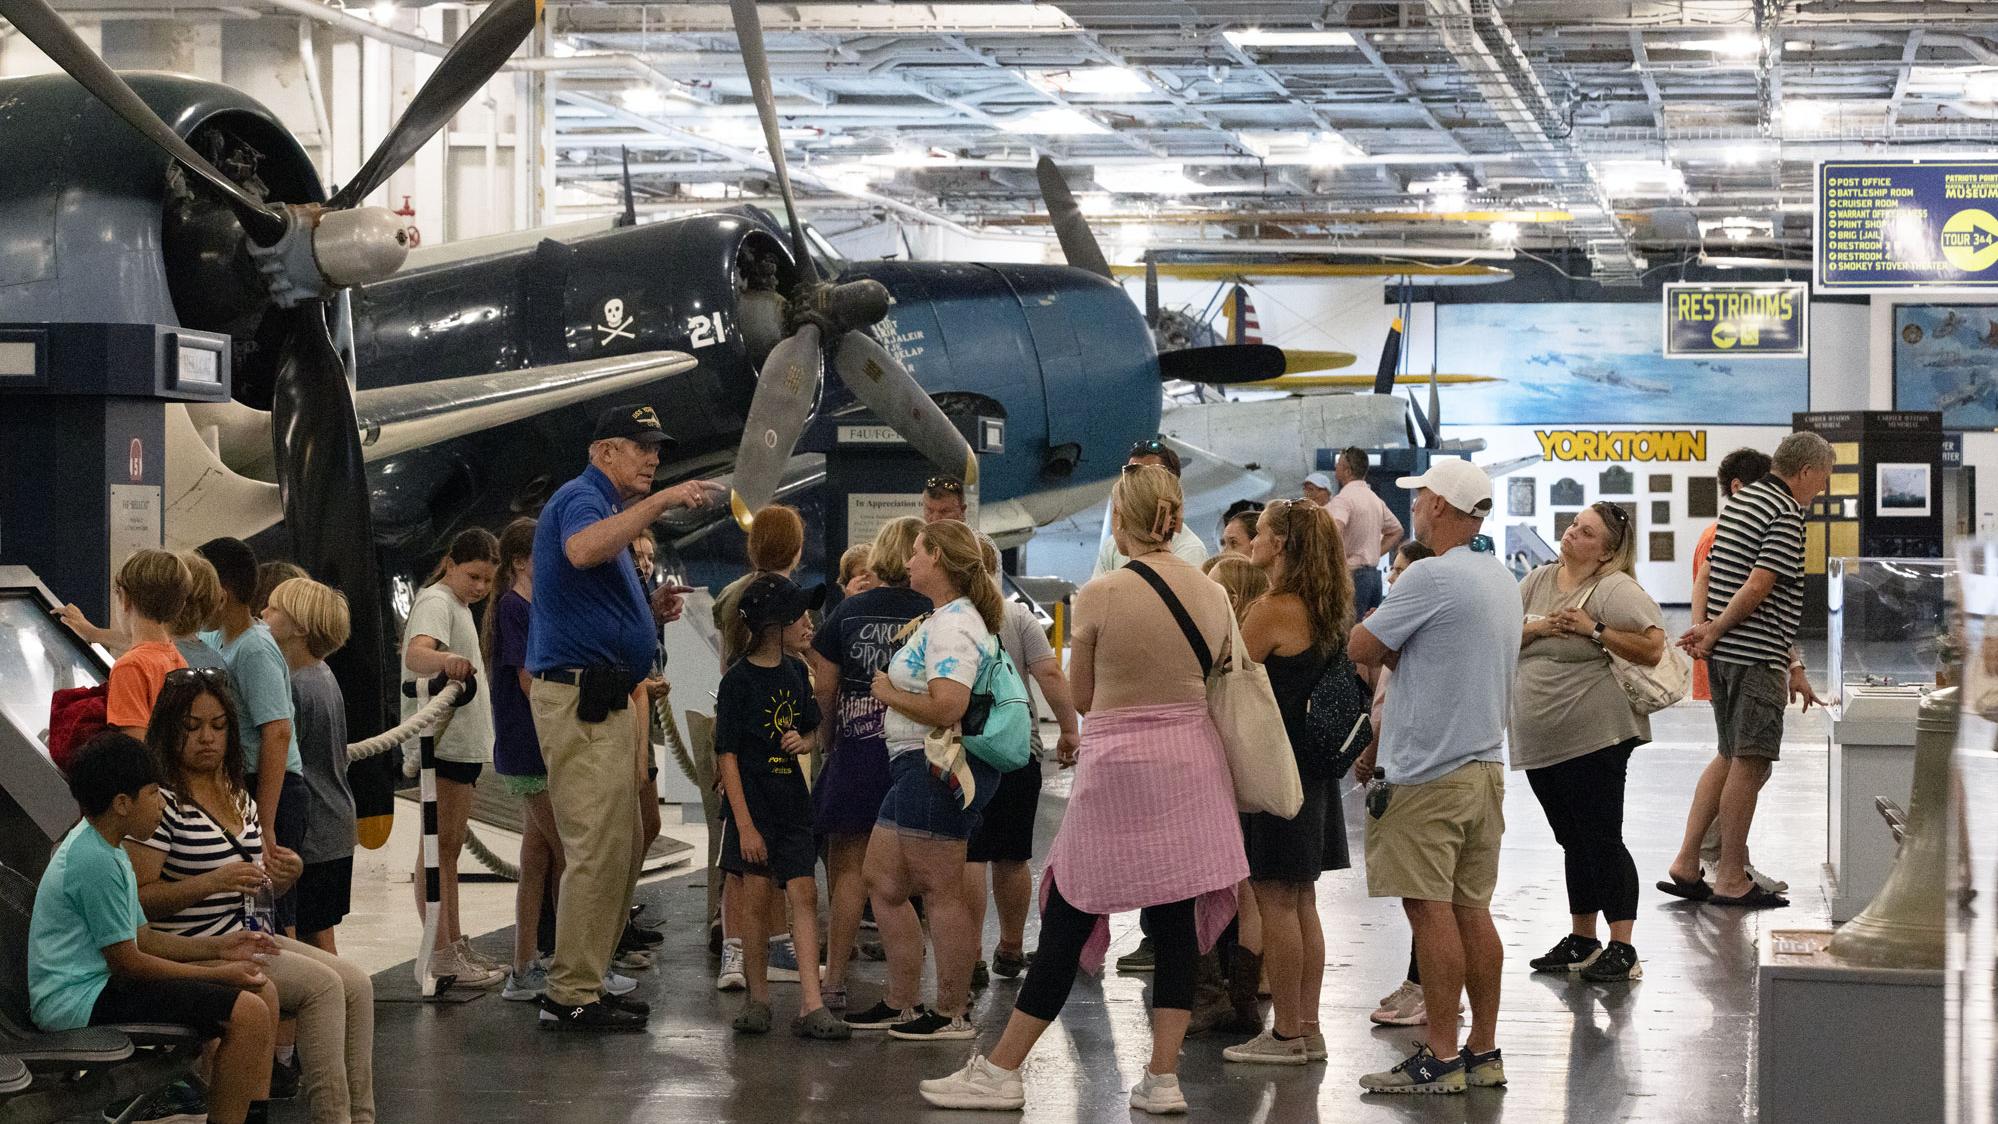 a museum volunteer speaks to a crowd of museum visitors in front of several vintage aircraft